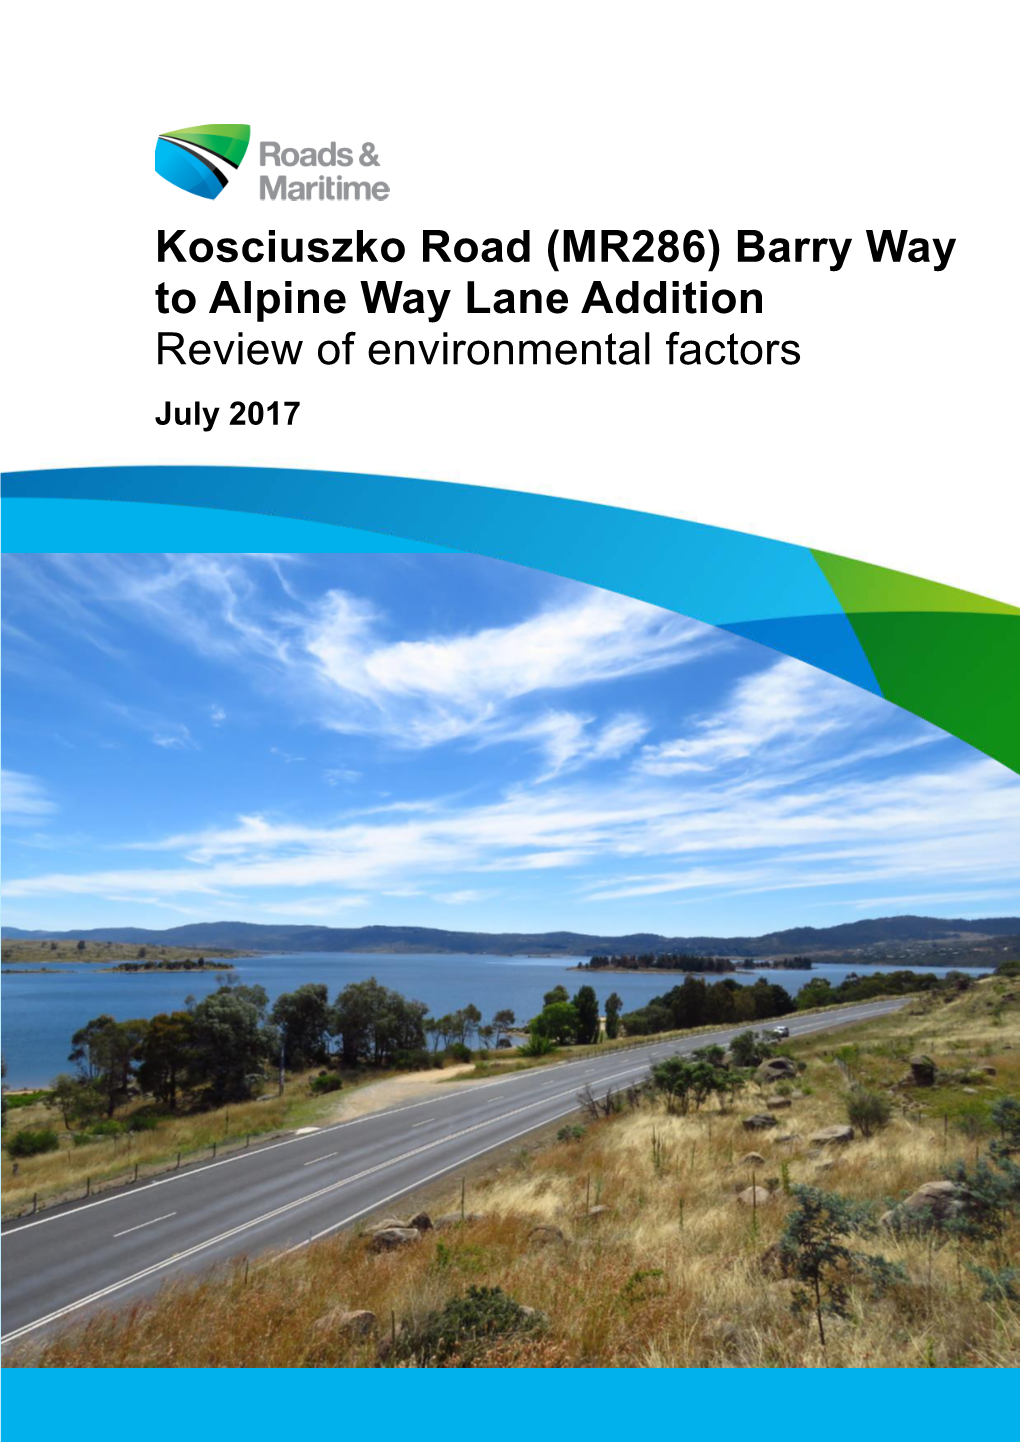 Kosciuszko Road (MR286) Barry Way to Alpine Way Lane Addition Review of Environmental Factors July 2017